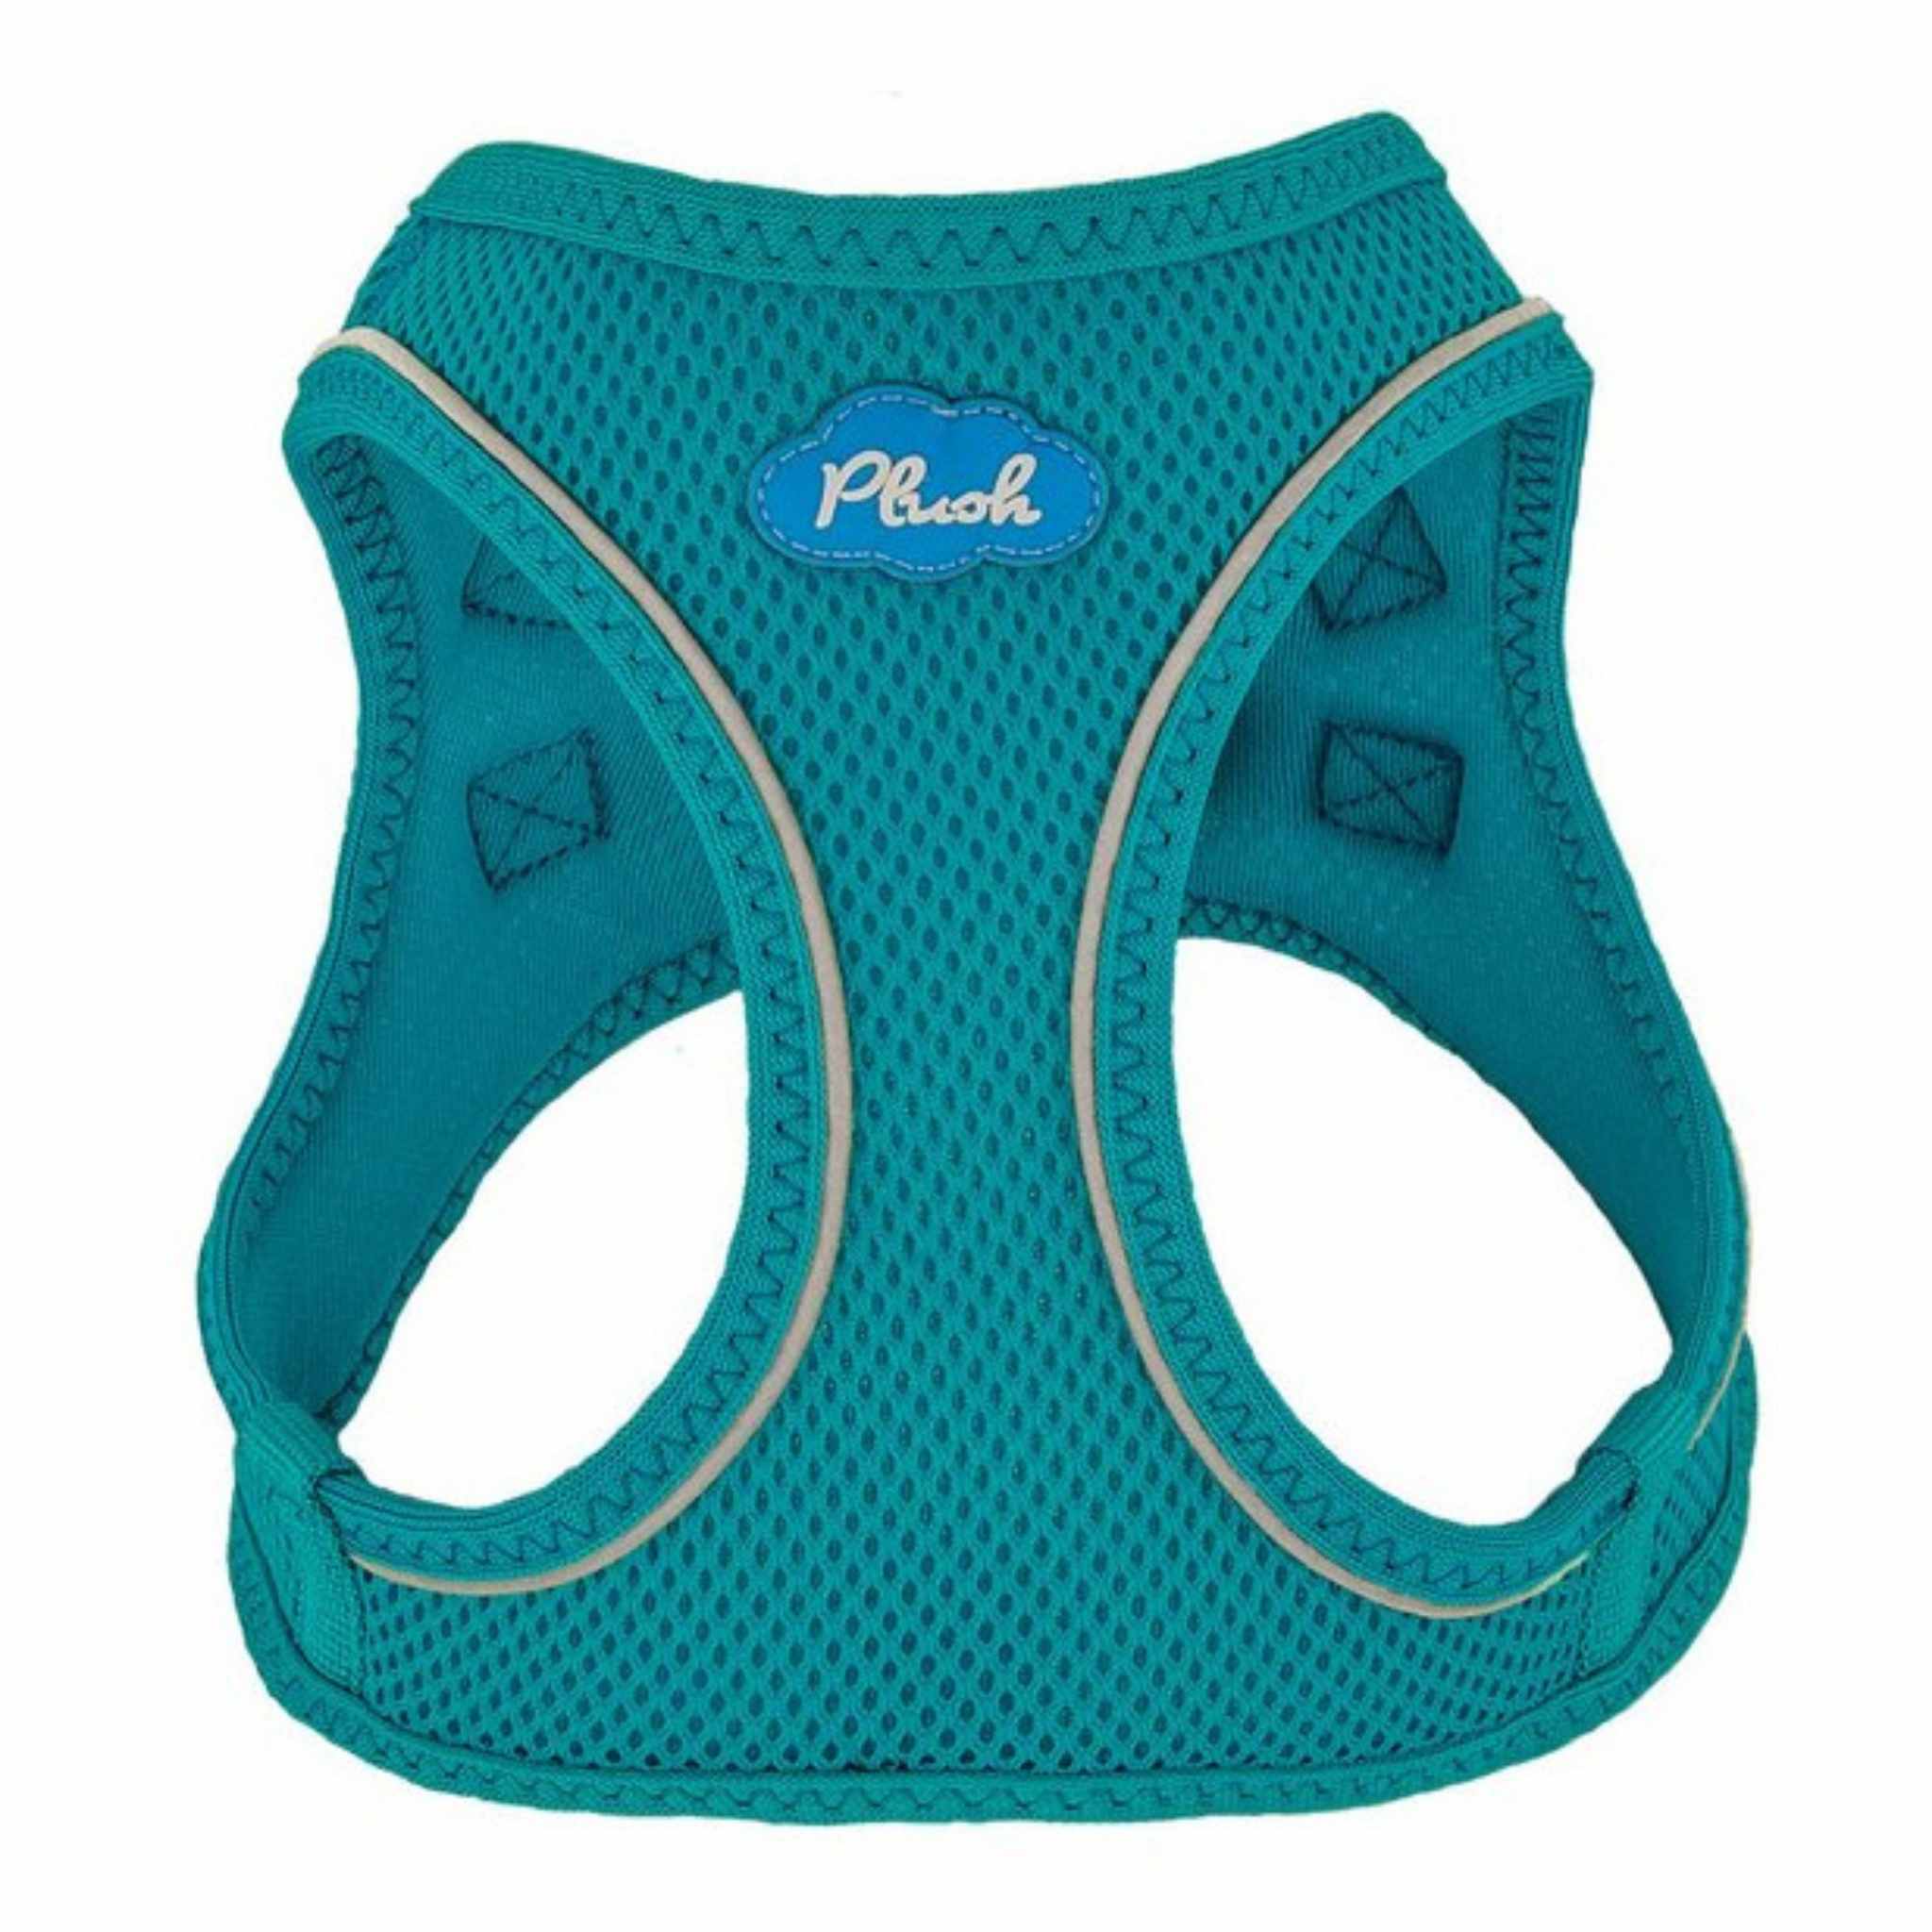 Mesh harness for cats & dogs ( Adelia ) petbay.lk